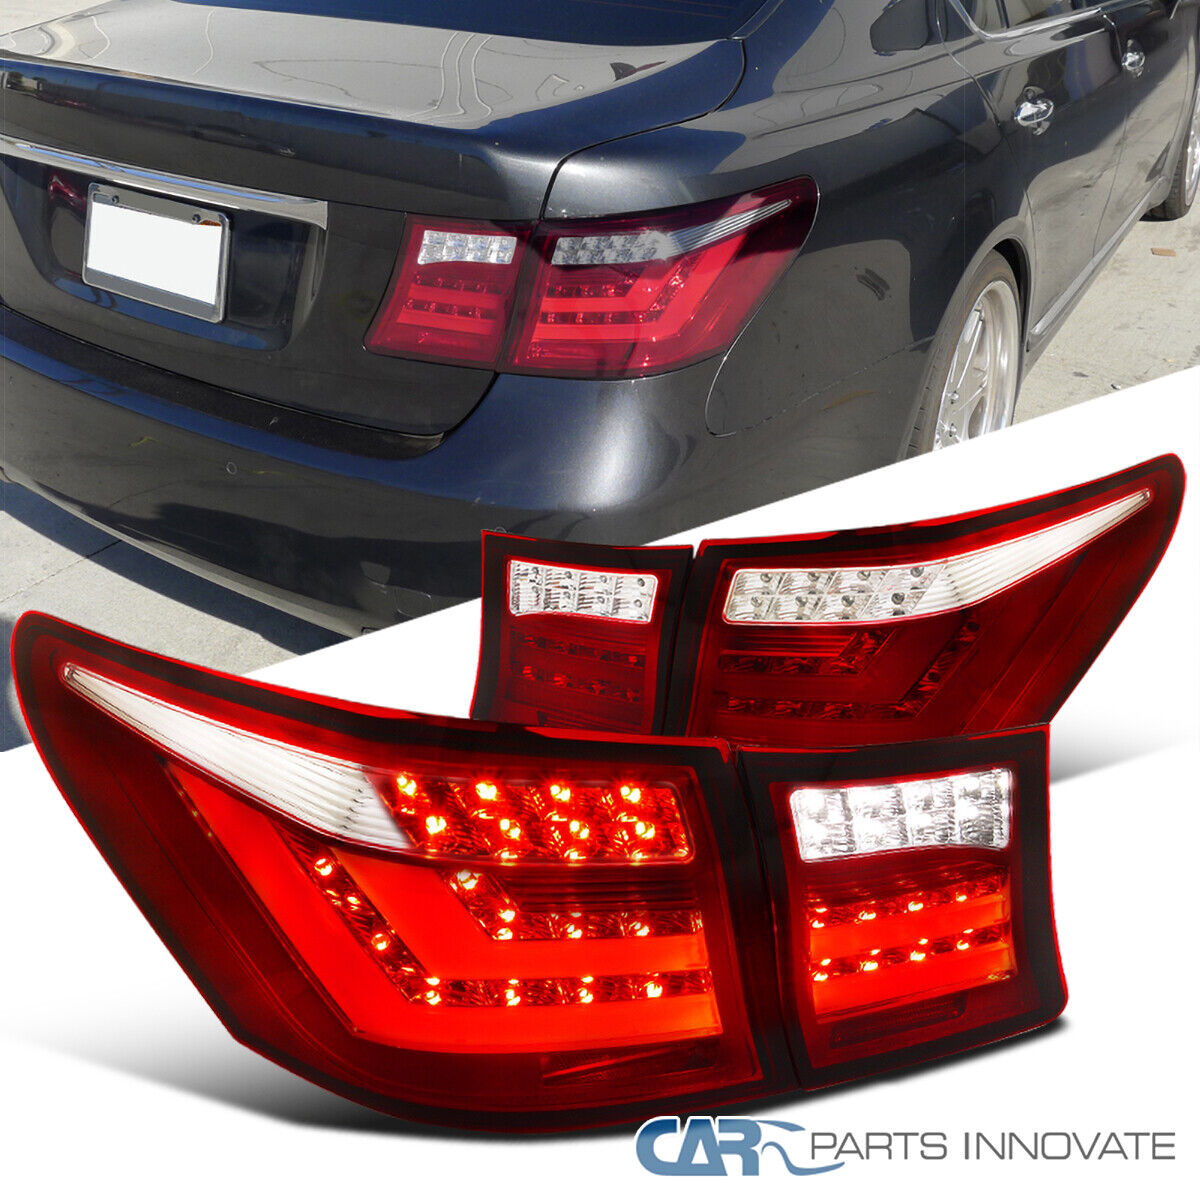 [Full LED Taillights] Fits 07-09 Lexus LS460 Tail Lights+Brake Lamps (Red/Clear)